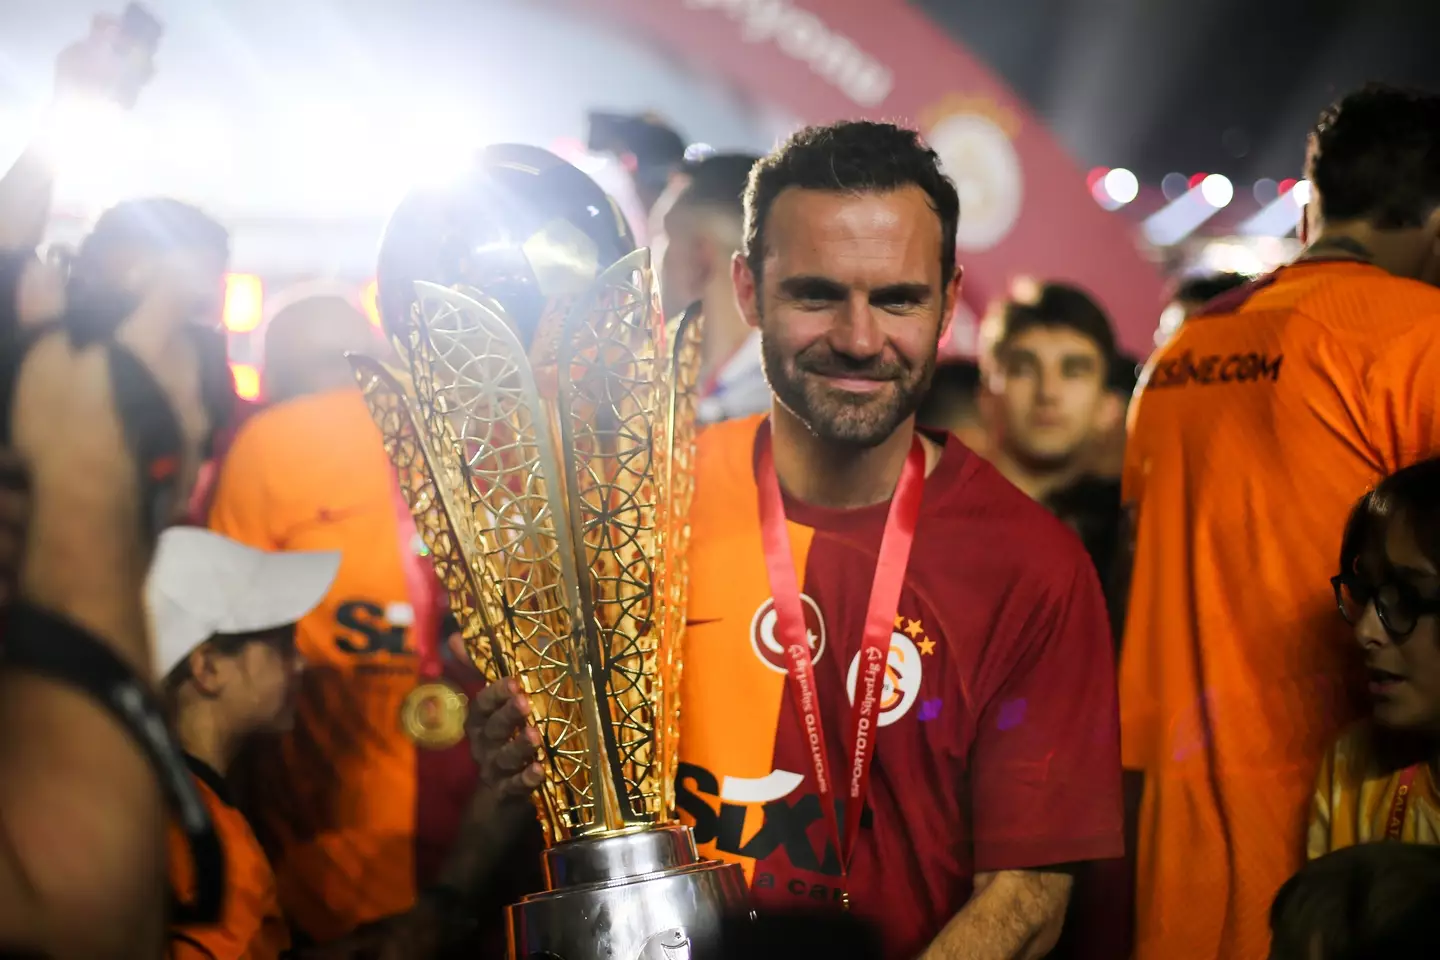 Mata spent one season in Turkey. He didn't leave empty-handed. (Image